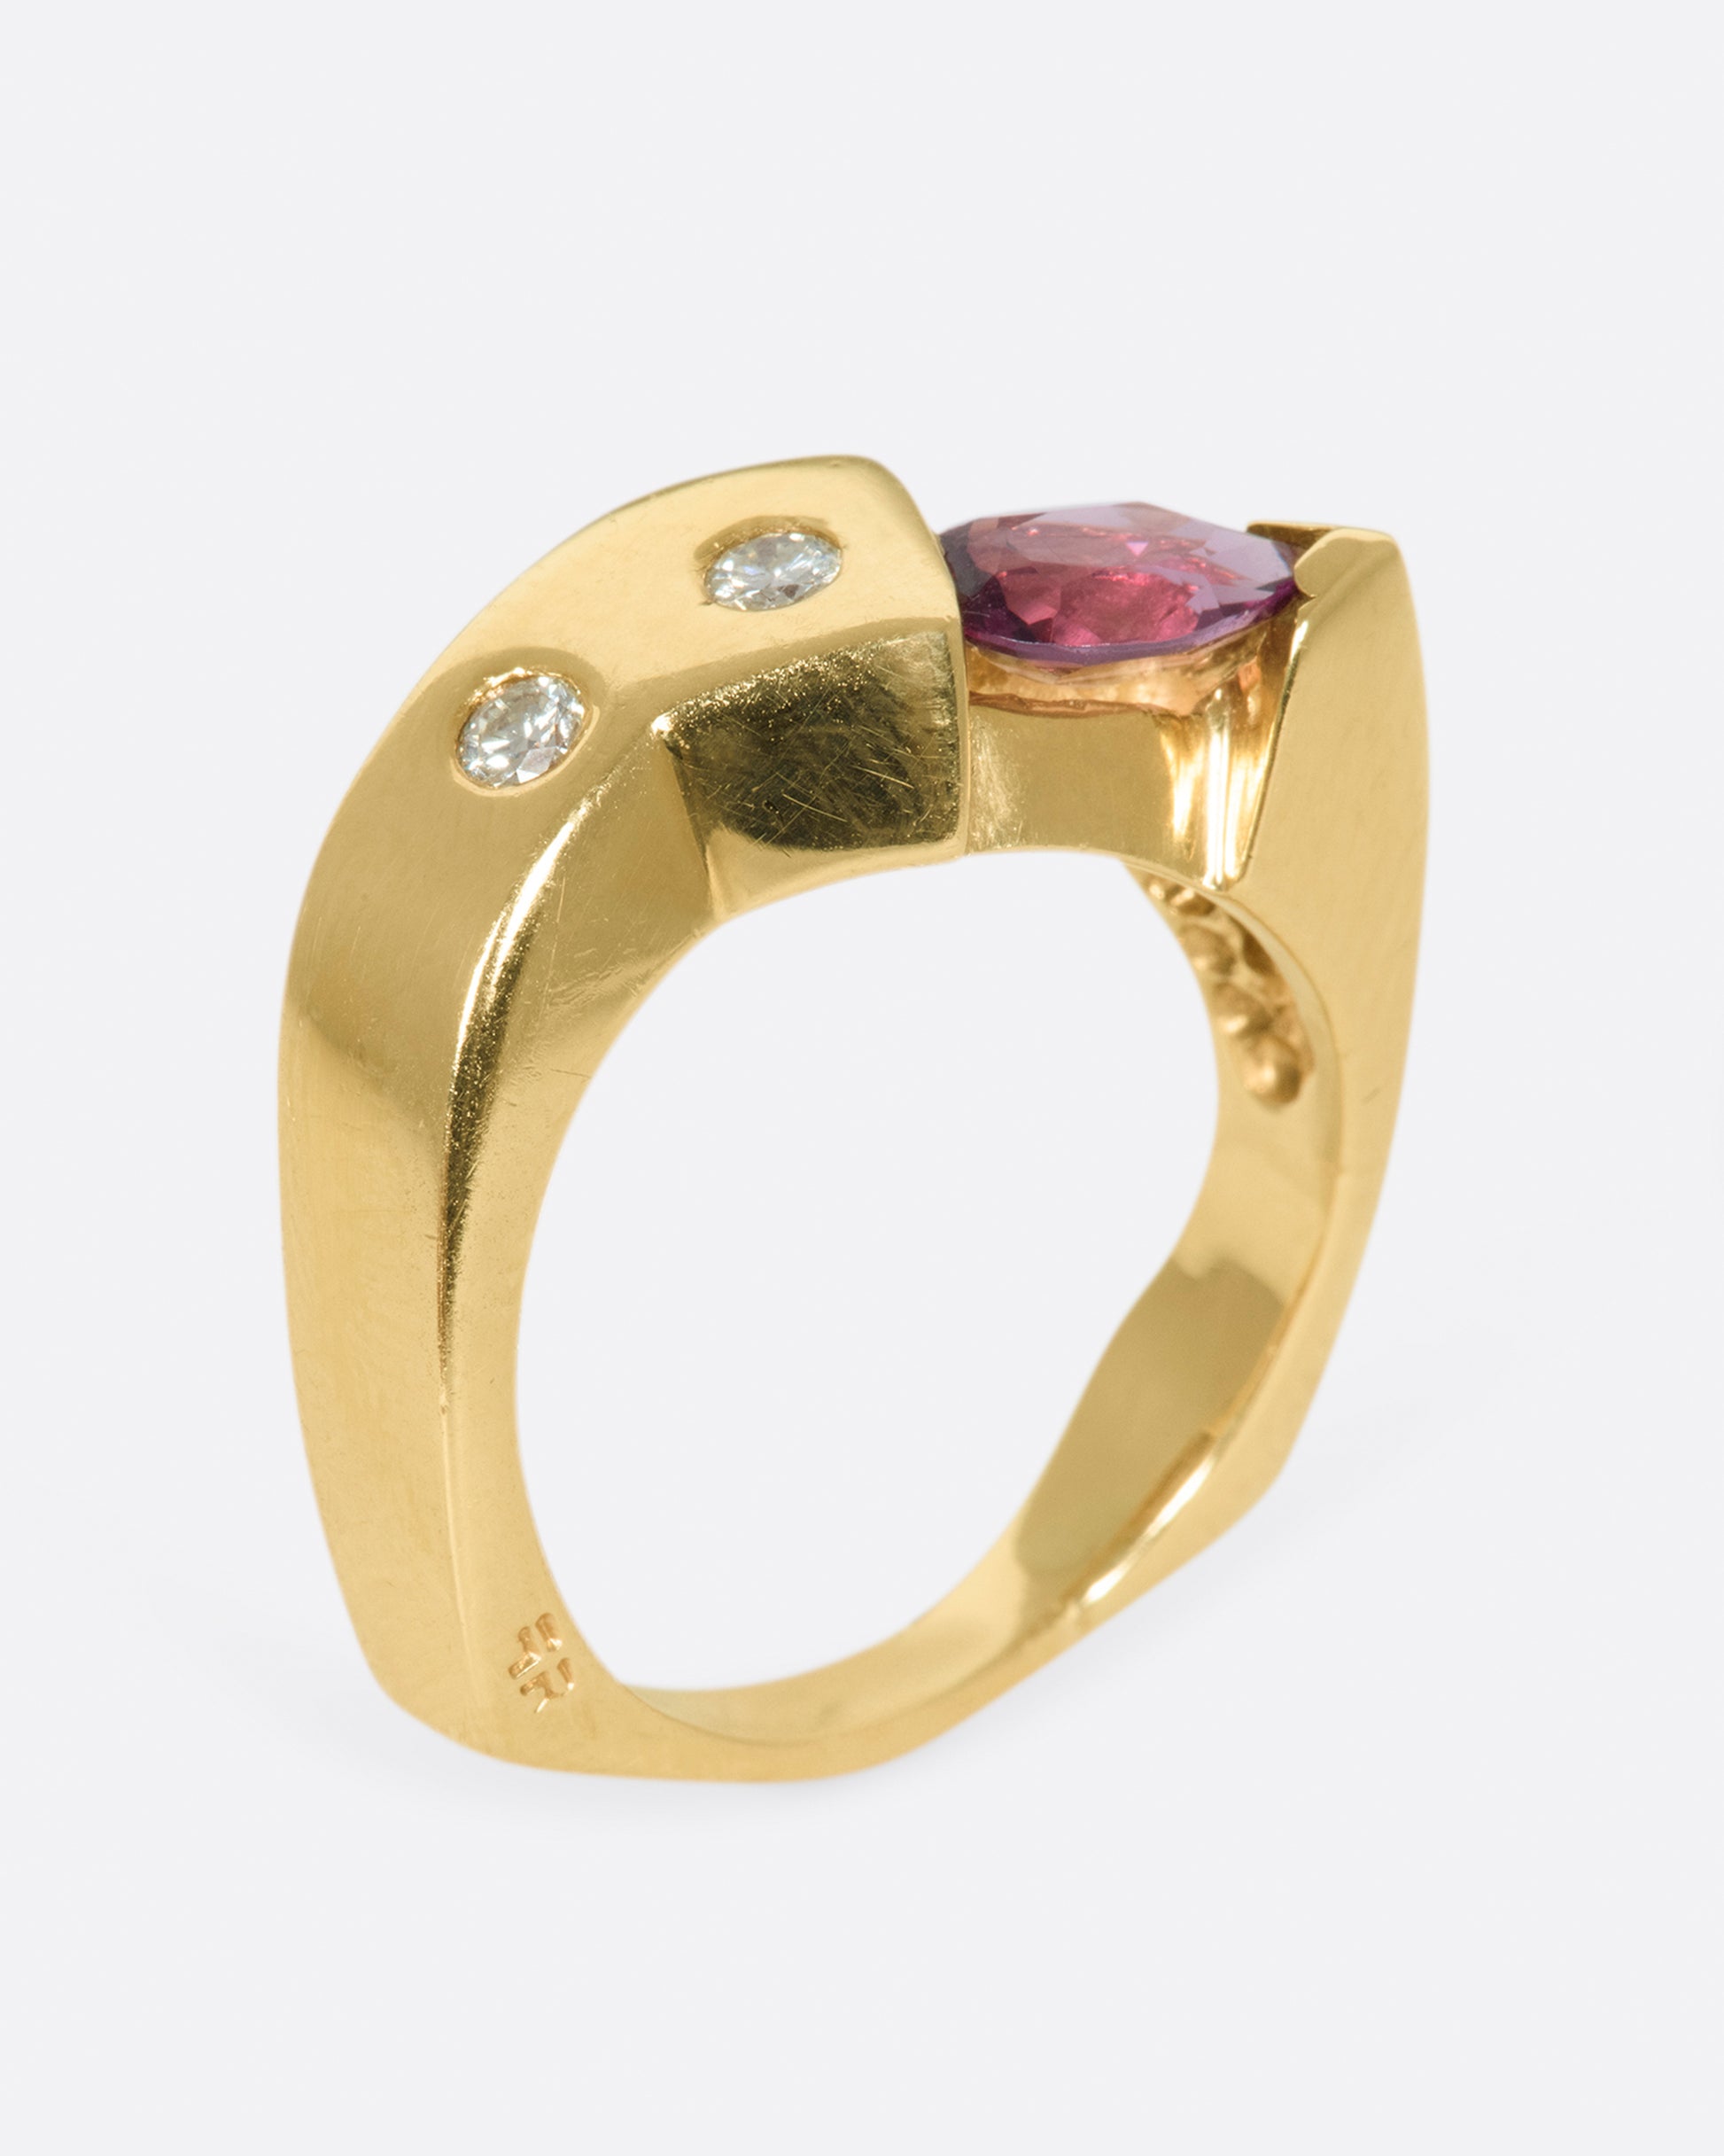 This ring looks different from every angle, is both substantial and comfortable, and stacks well with others.